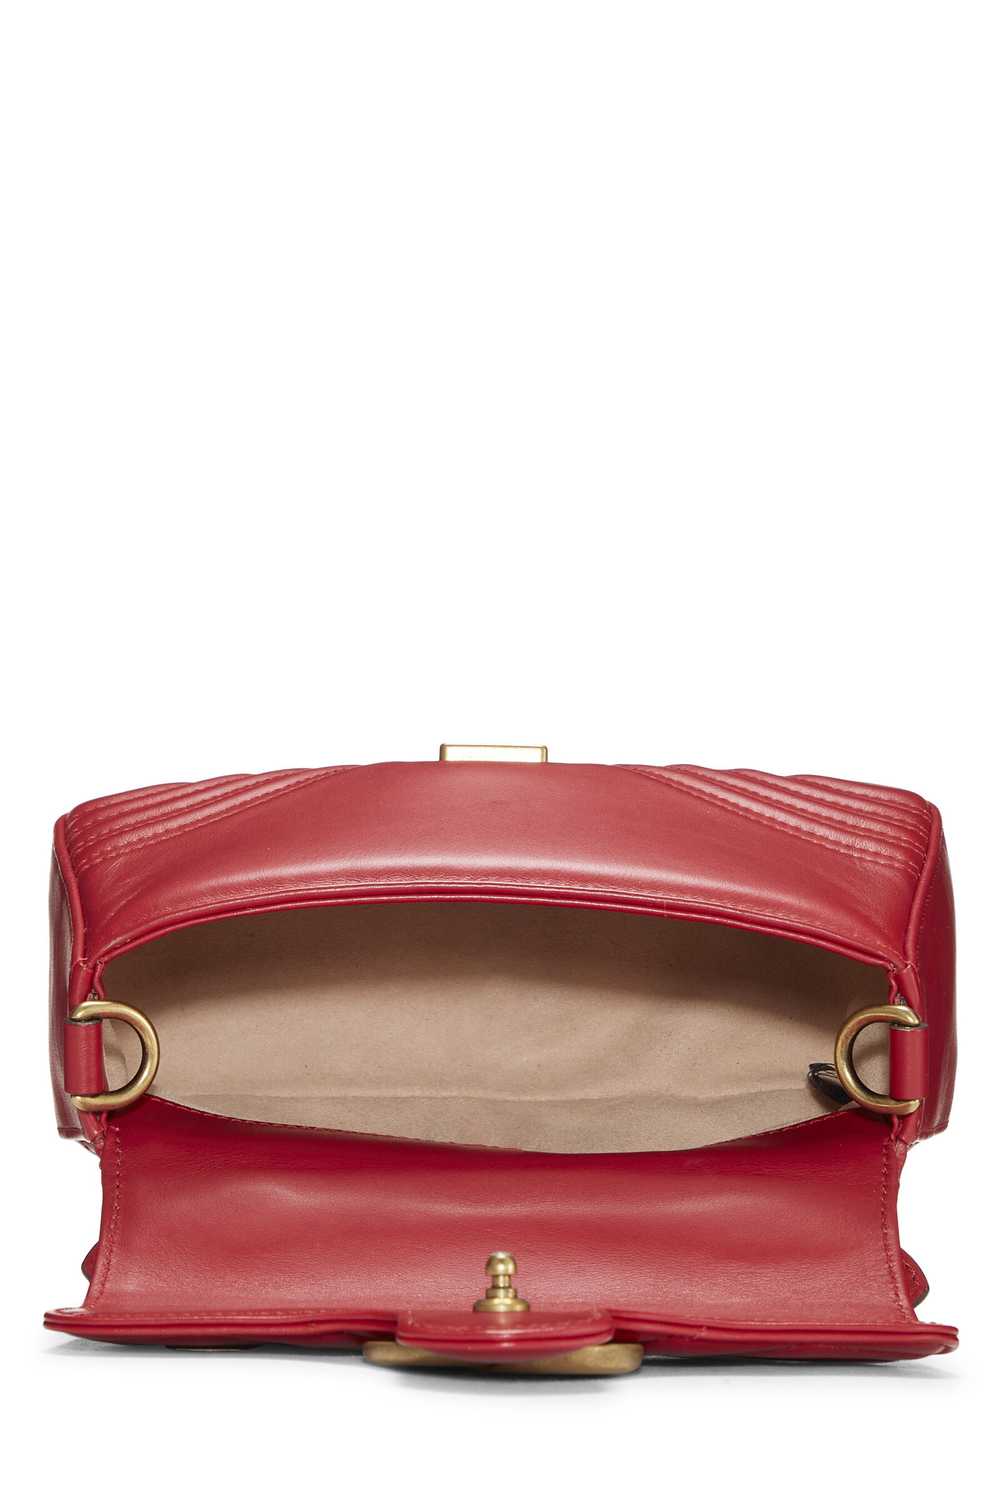 Red Leather GG Marmont Top Handle Bag Mini - image 6